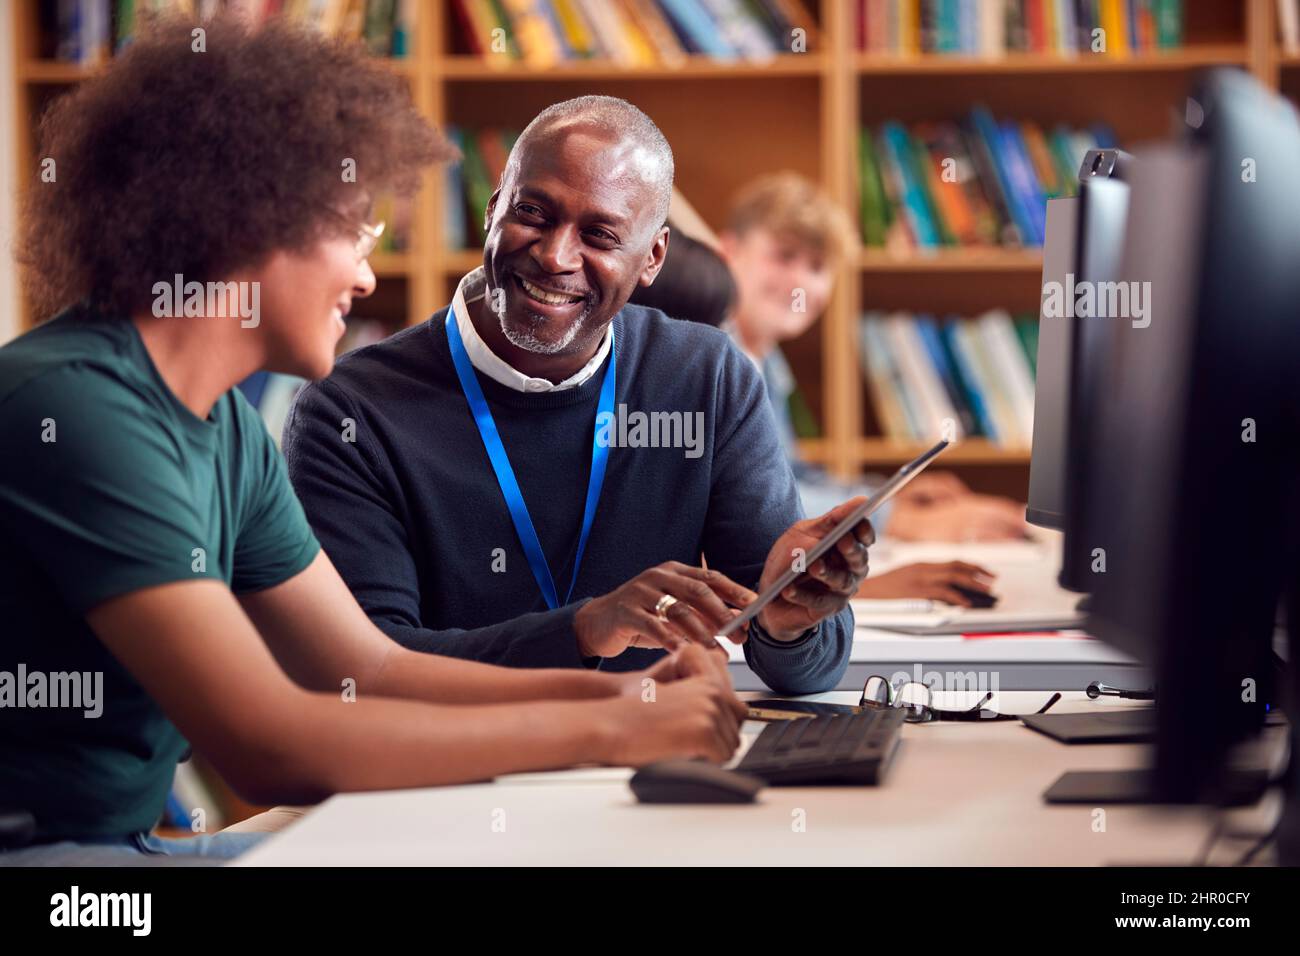 Male University Or College Student Working At Computer In Library Being Helped By Tutor Stock Photo